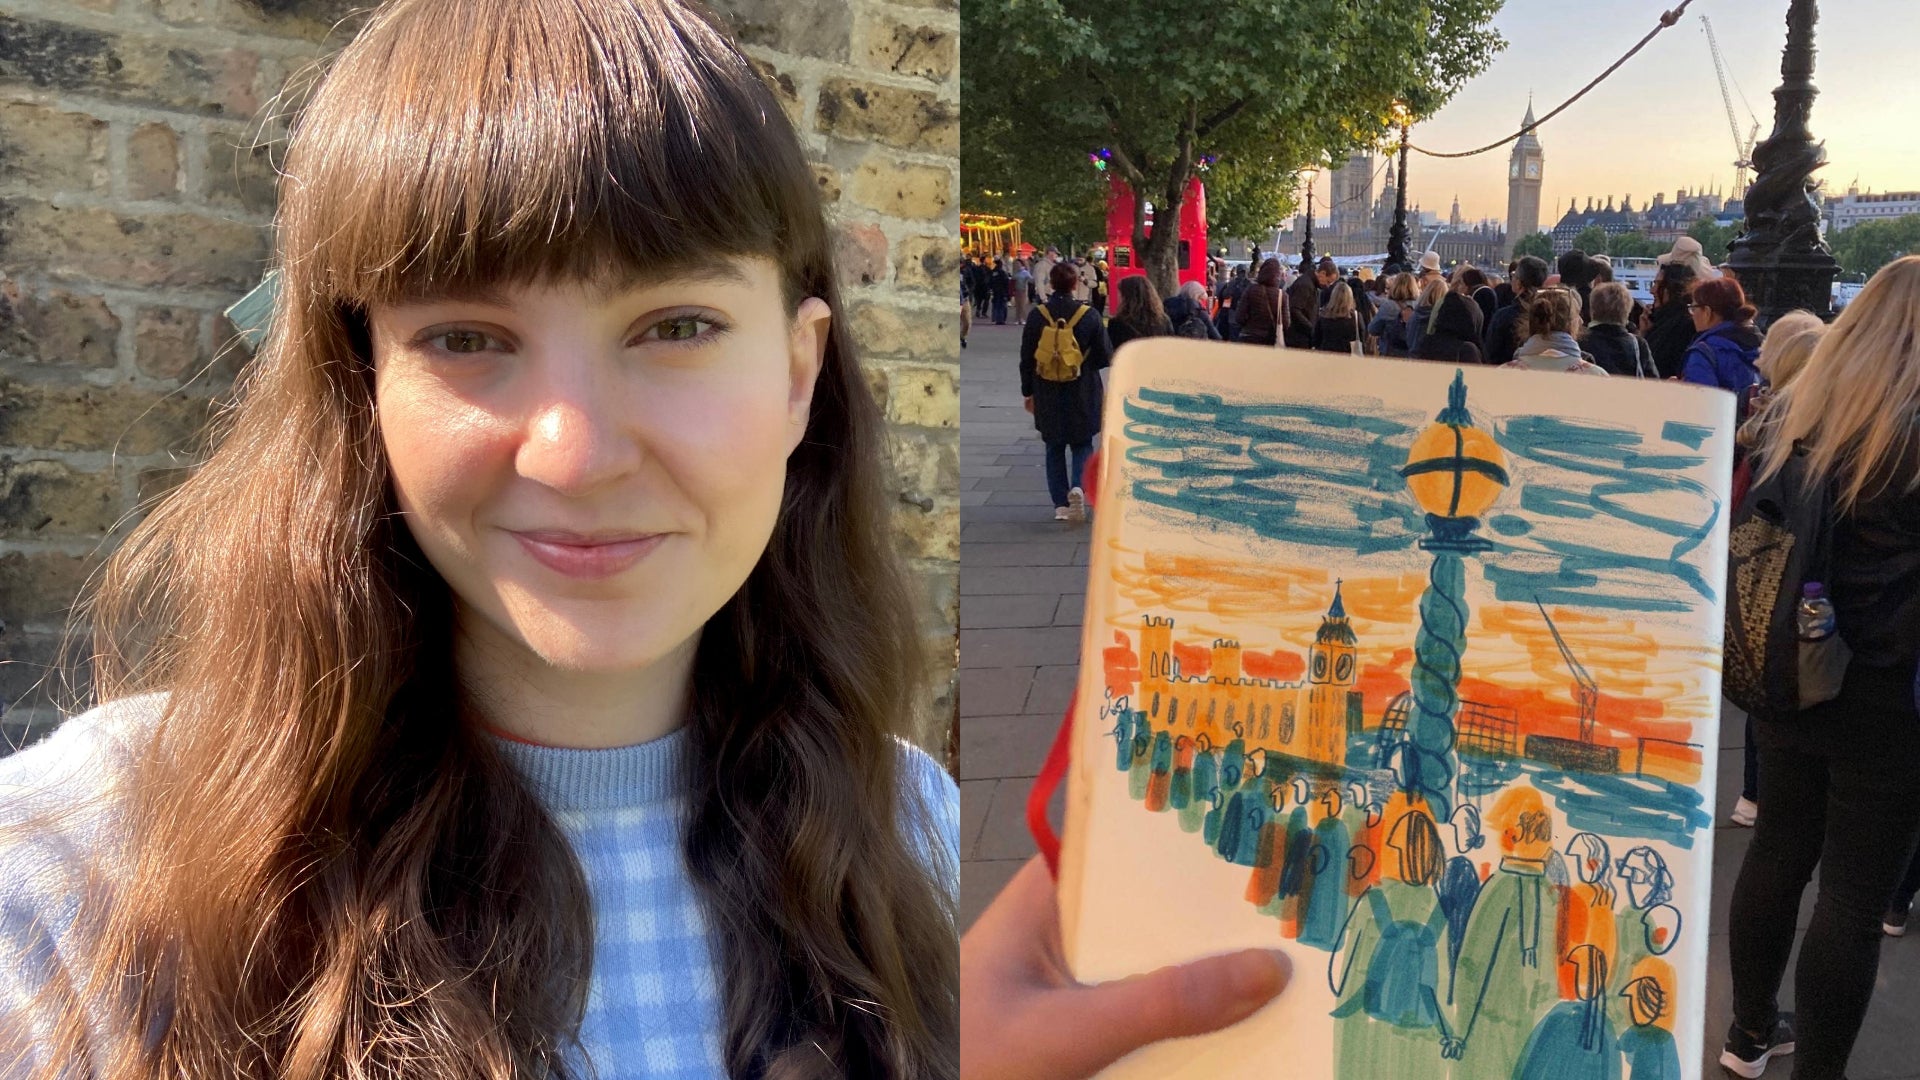 Freelance illustrator Gracie Dahl, who drew the queue in London on her way home (Gracie Dahl/PA)